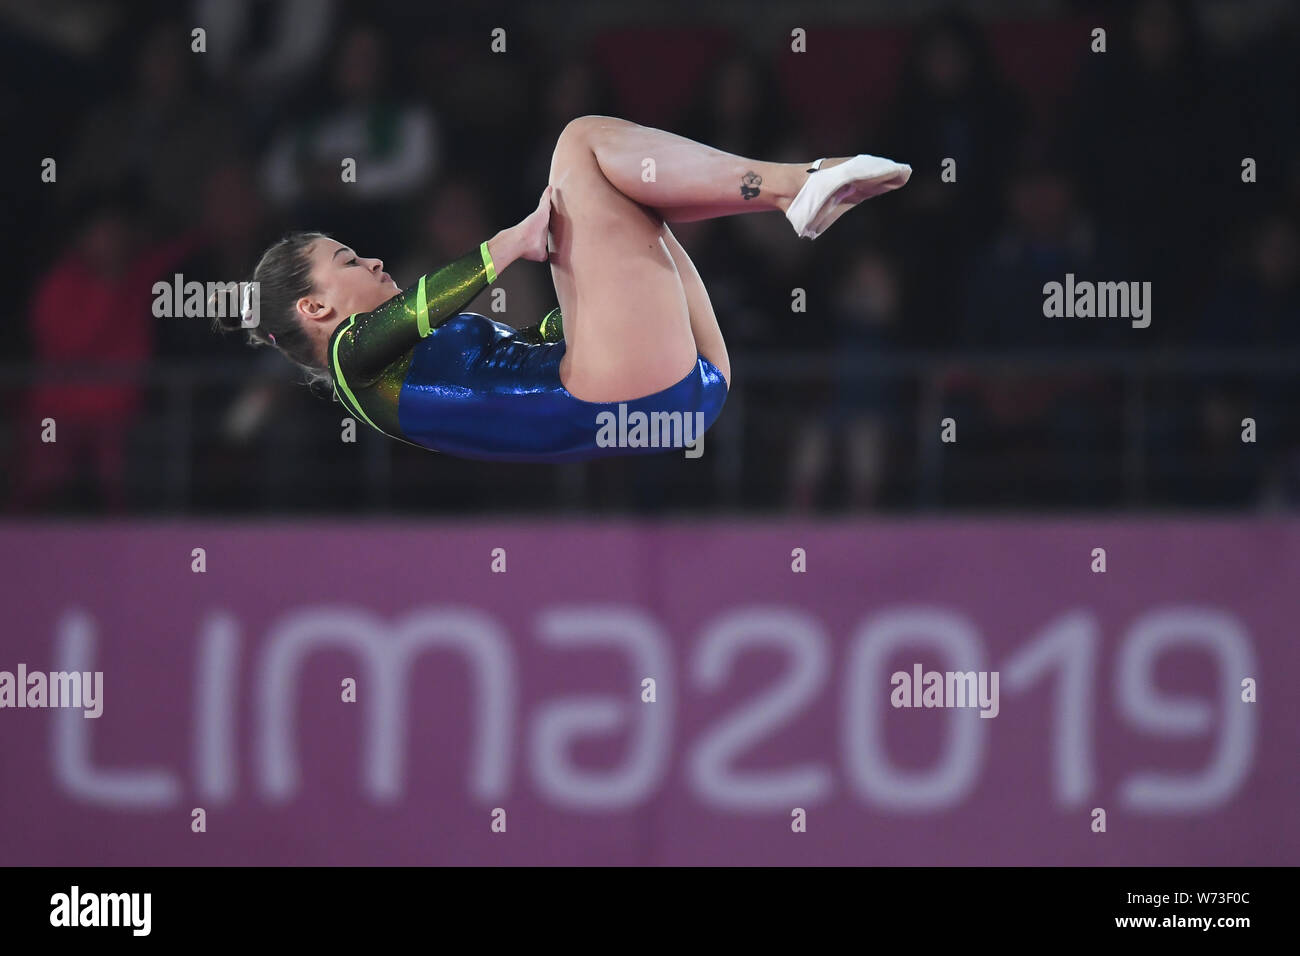 Lima, Peru. 4th Aug, 2019. ALICE GOMES from Brazil flips upside down during the competition held in the Polideportivo Villa El Salvador in Lima, Peru. Credit: Amy Sanderson/ZUMA Wire/Alamy Live News Stock Photo